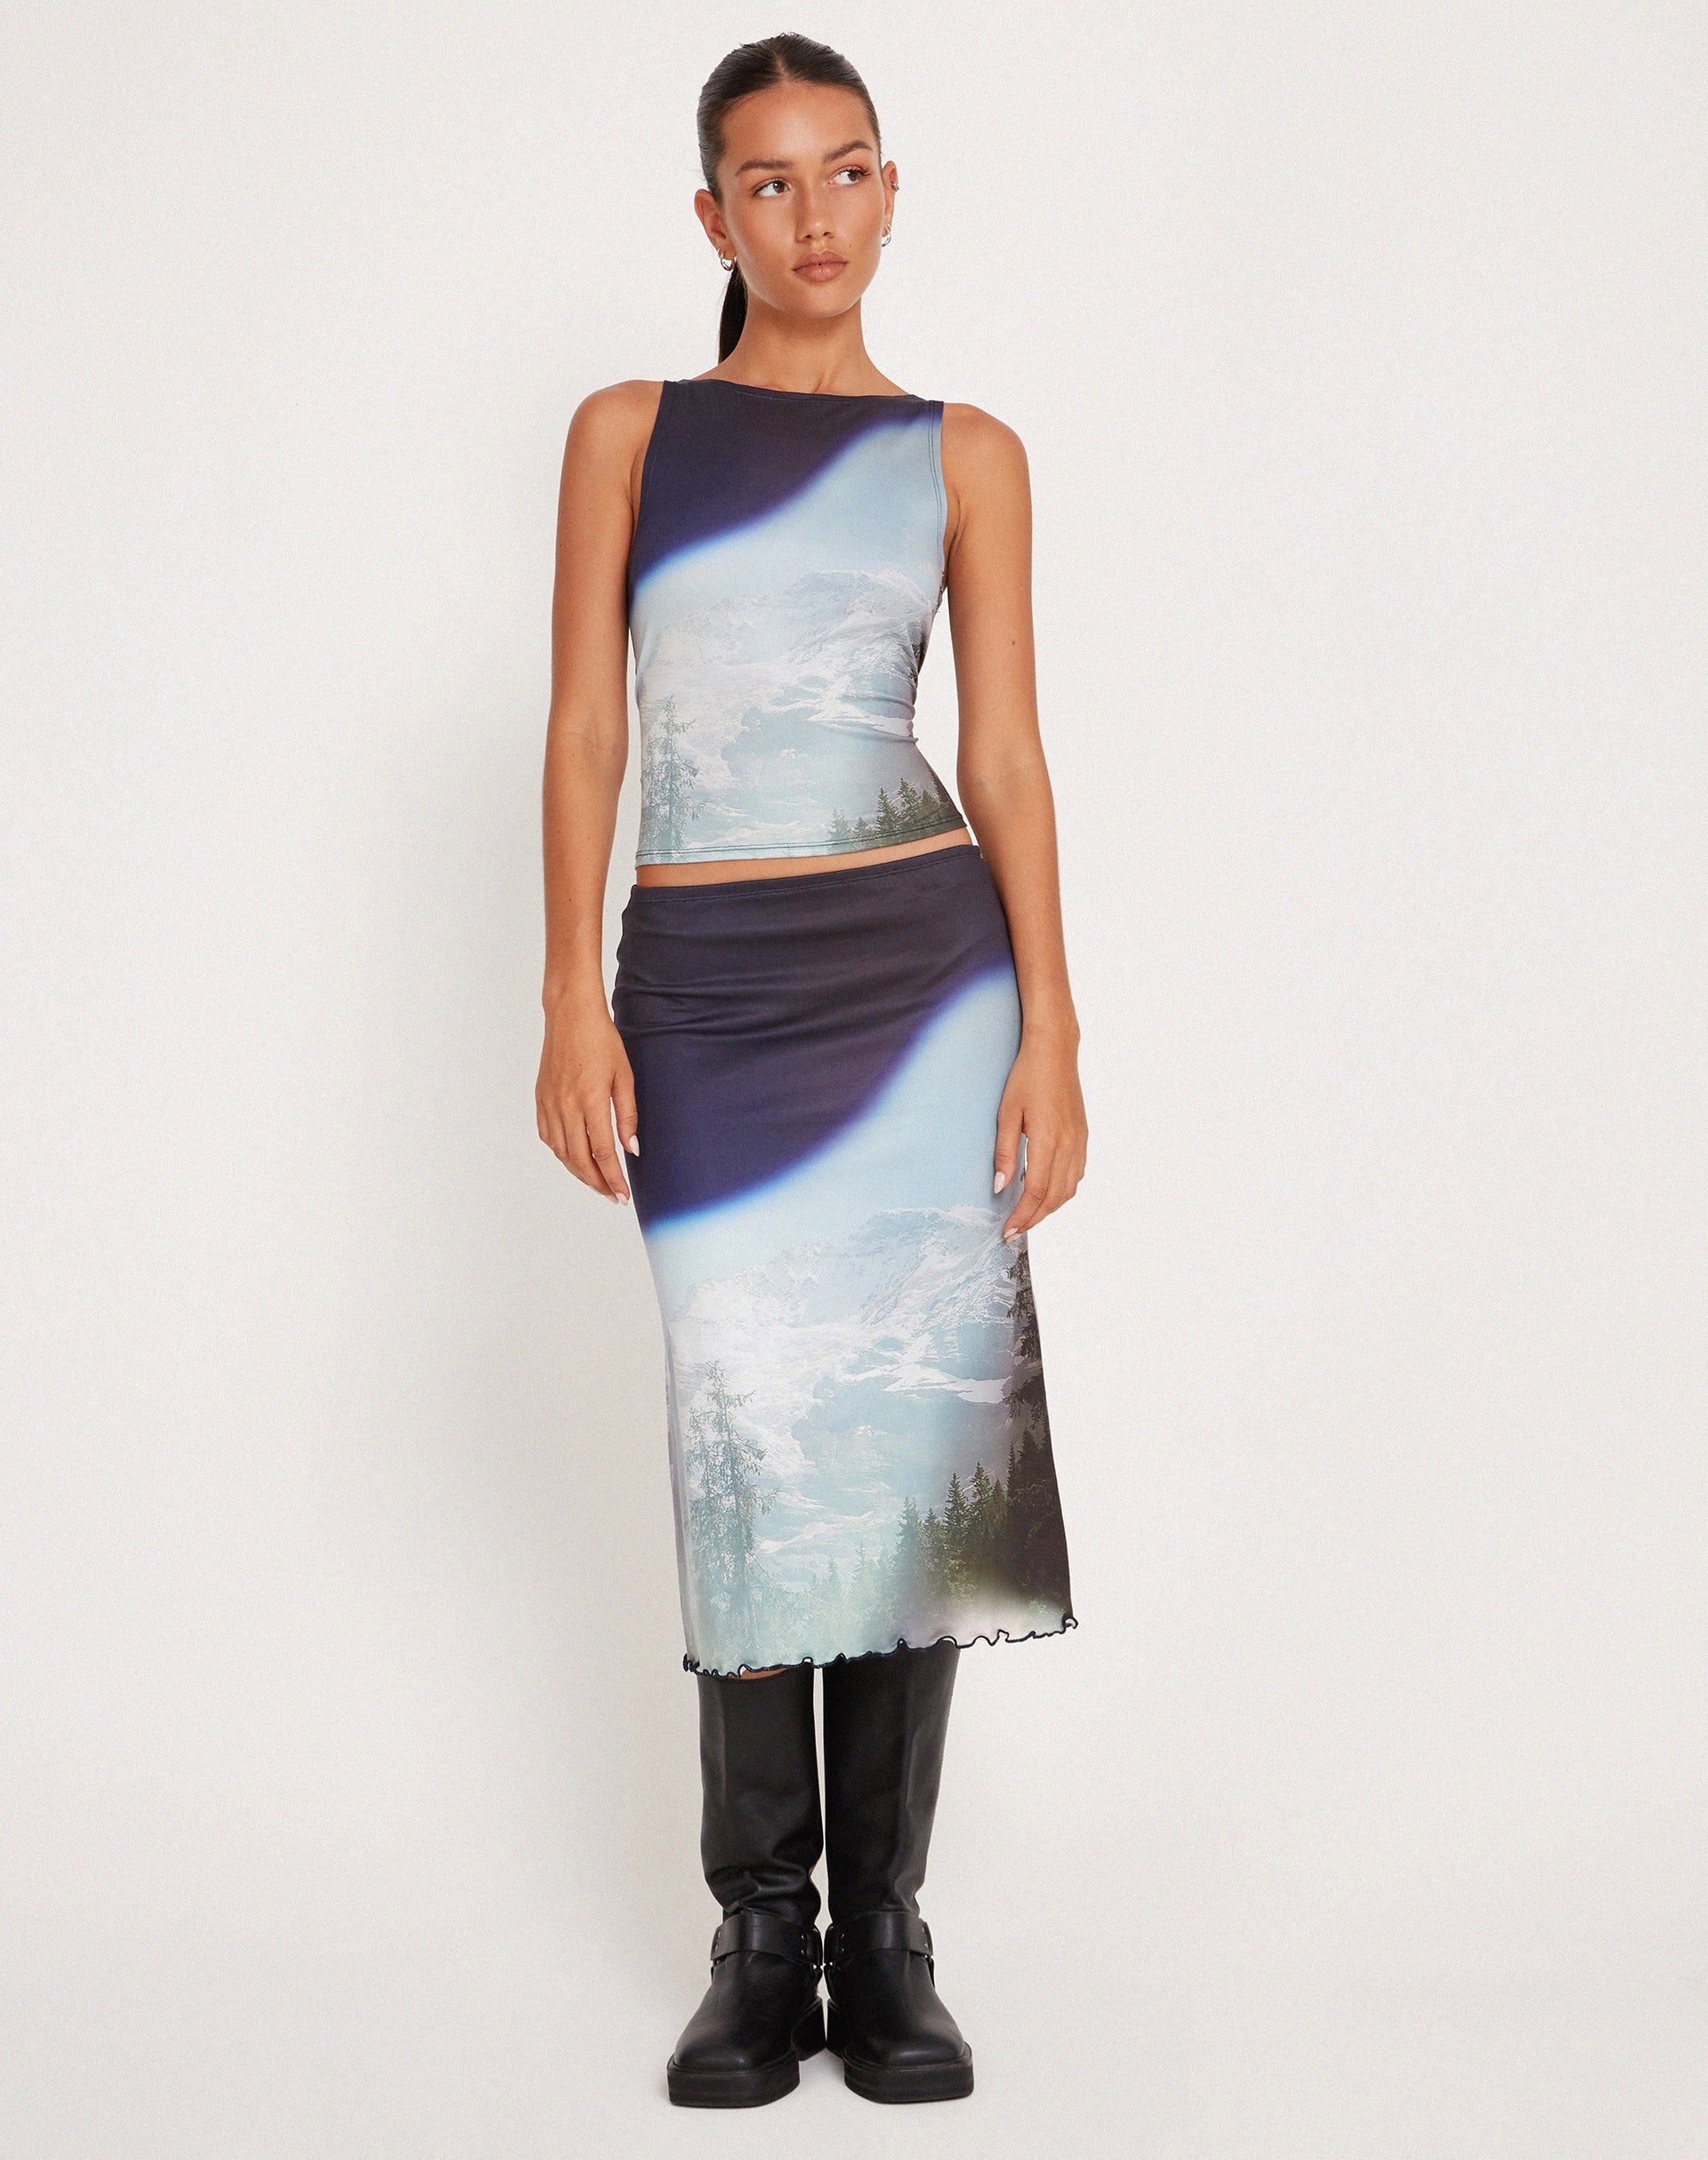 Image of Rujha Midi Skirt in Abstract Landscape Collage